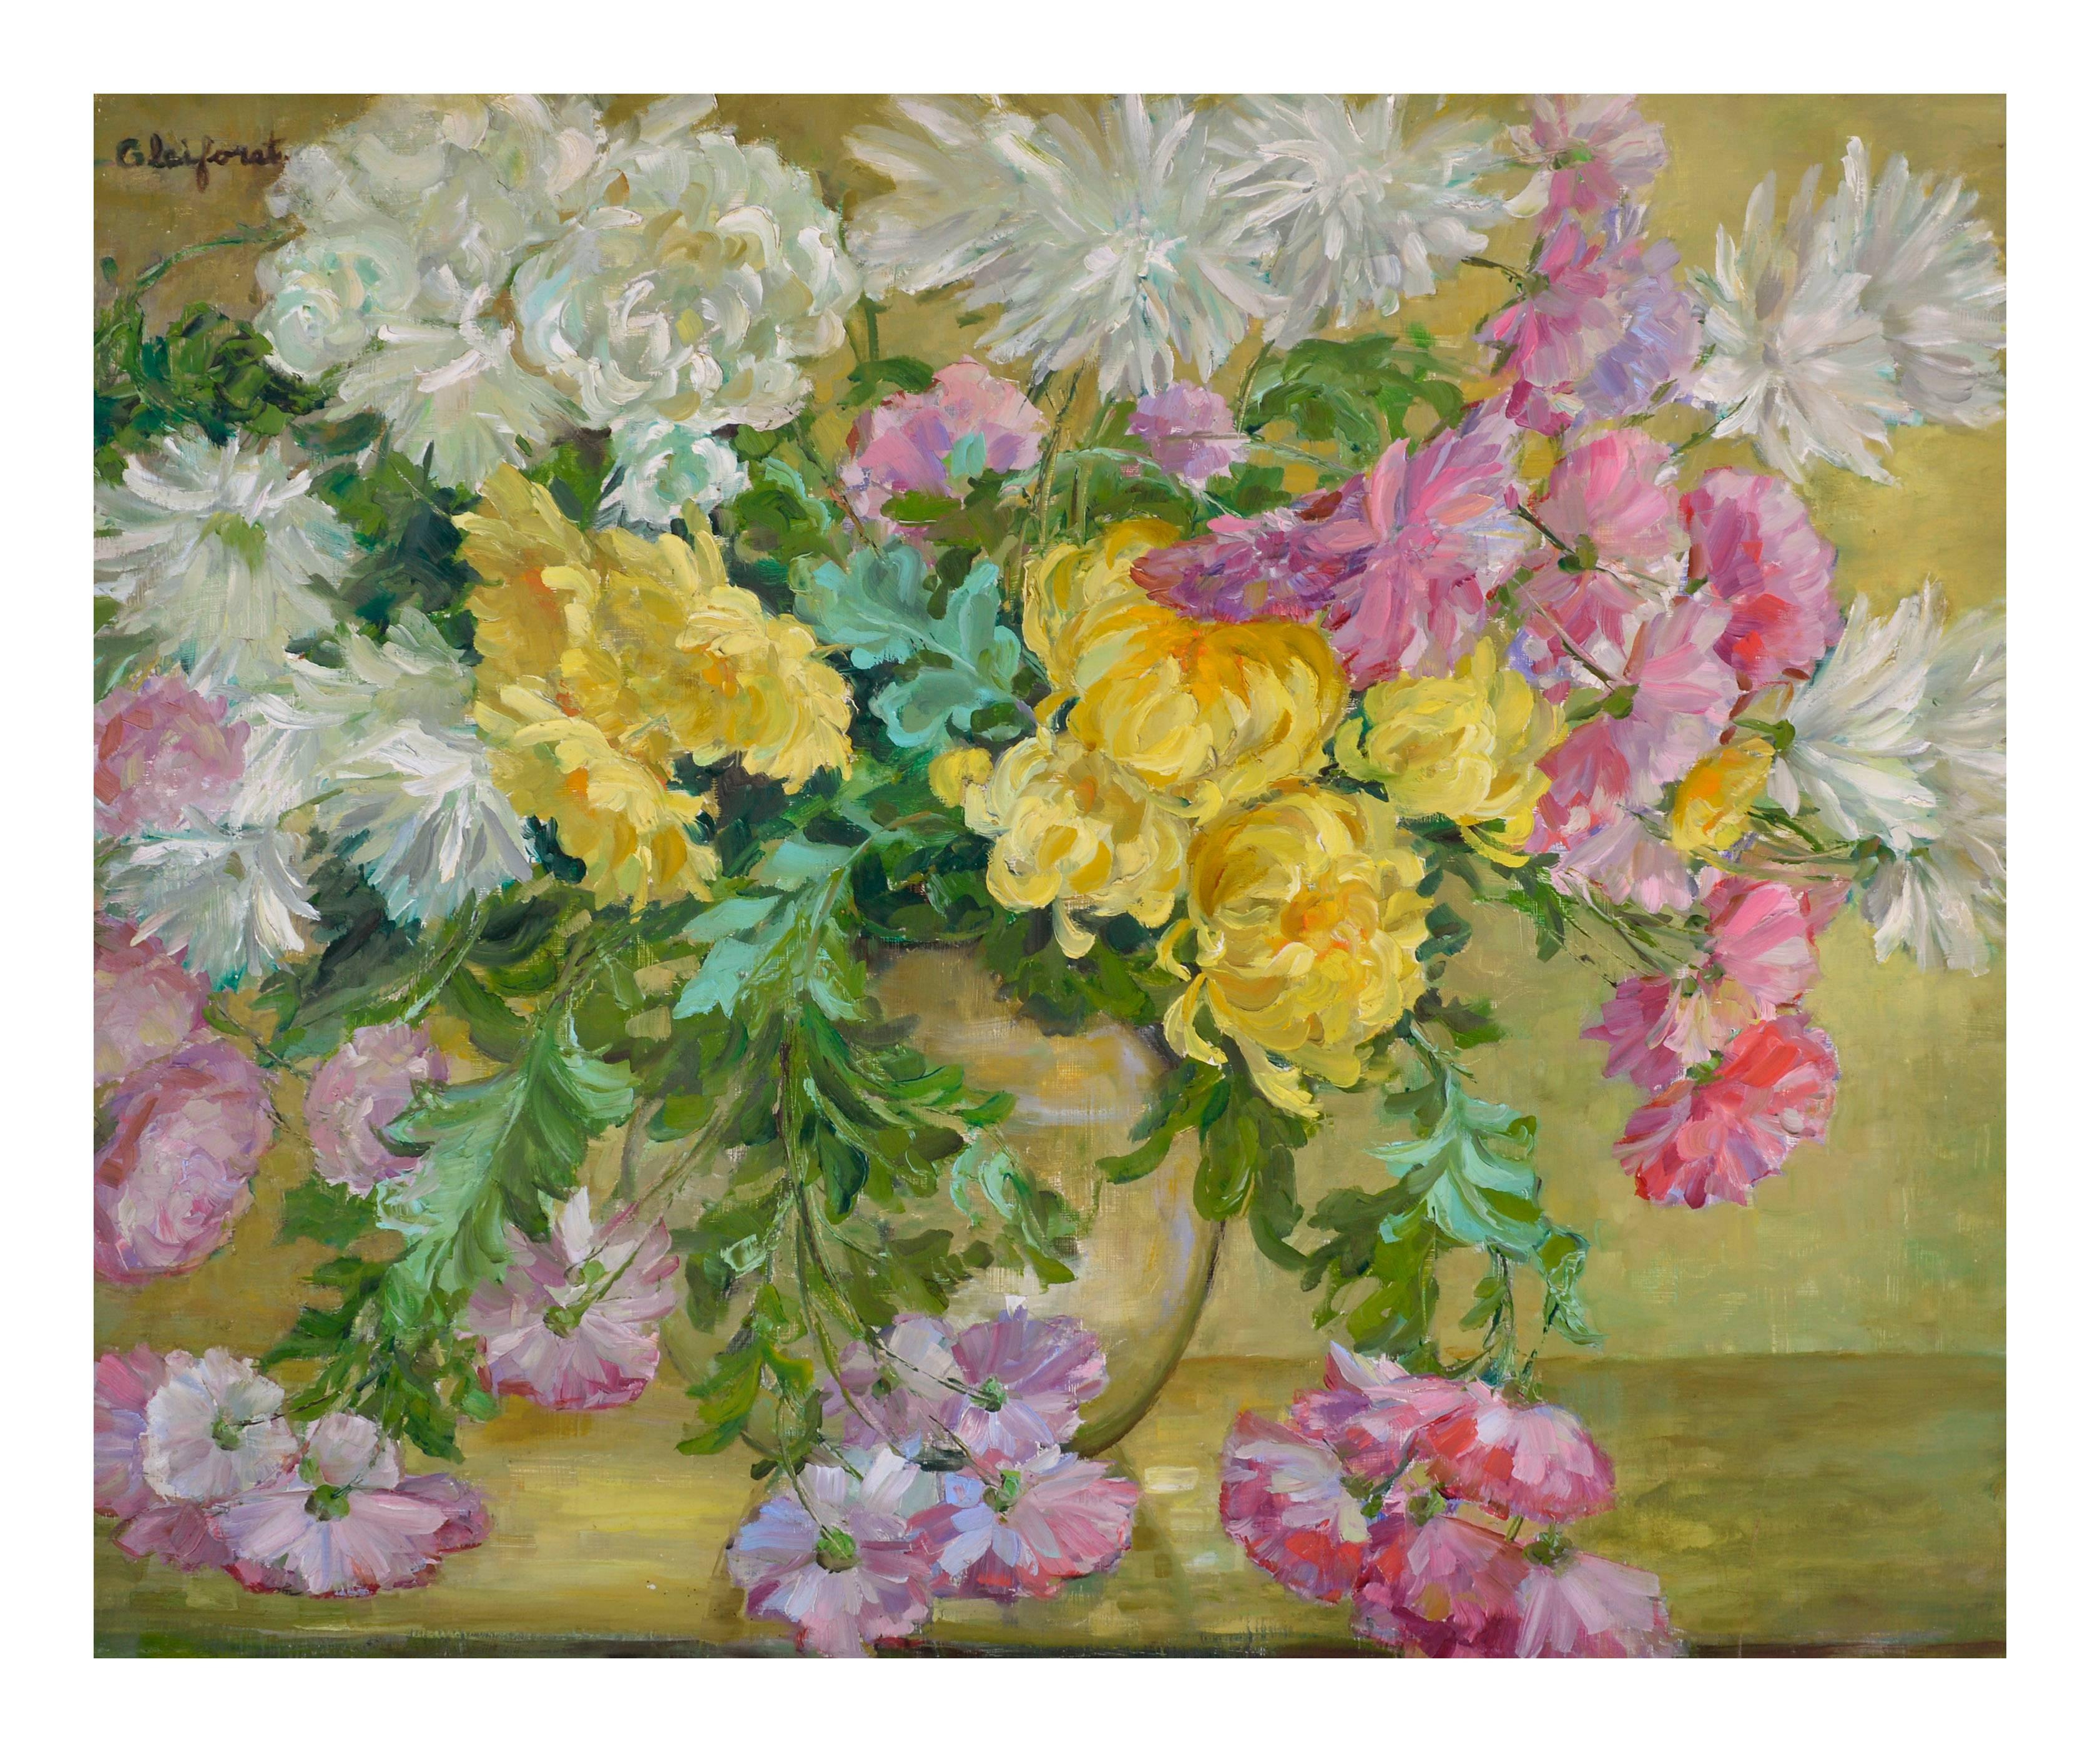 Chrysanthemums & Cosmos Bouquet  - Painting by Helen Enoch Gleiforst